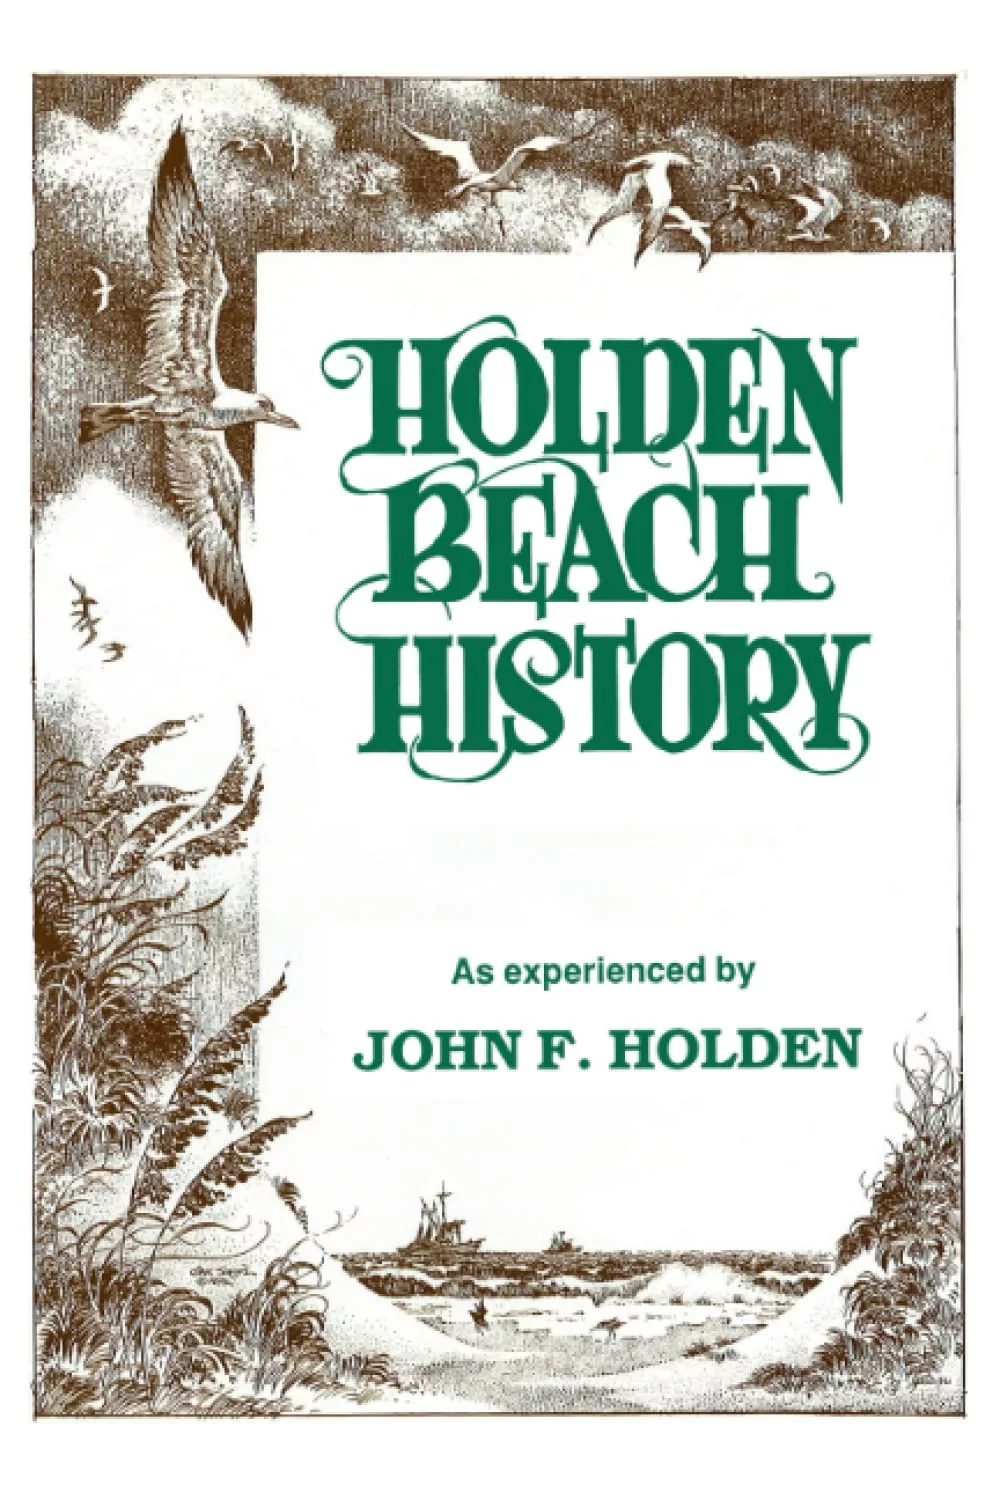 Book Cover of Holden Beach History: As Experienced by John F. Holden